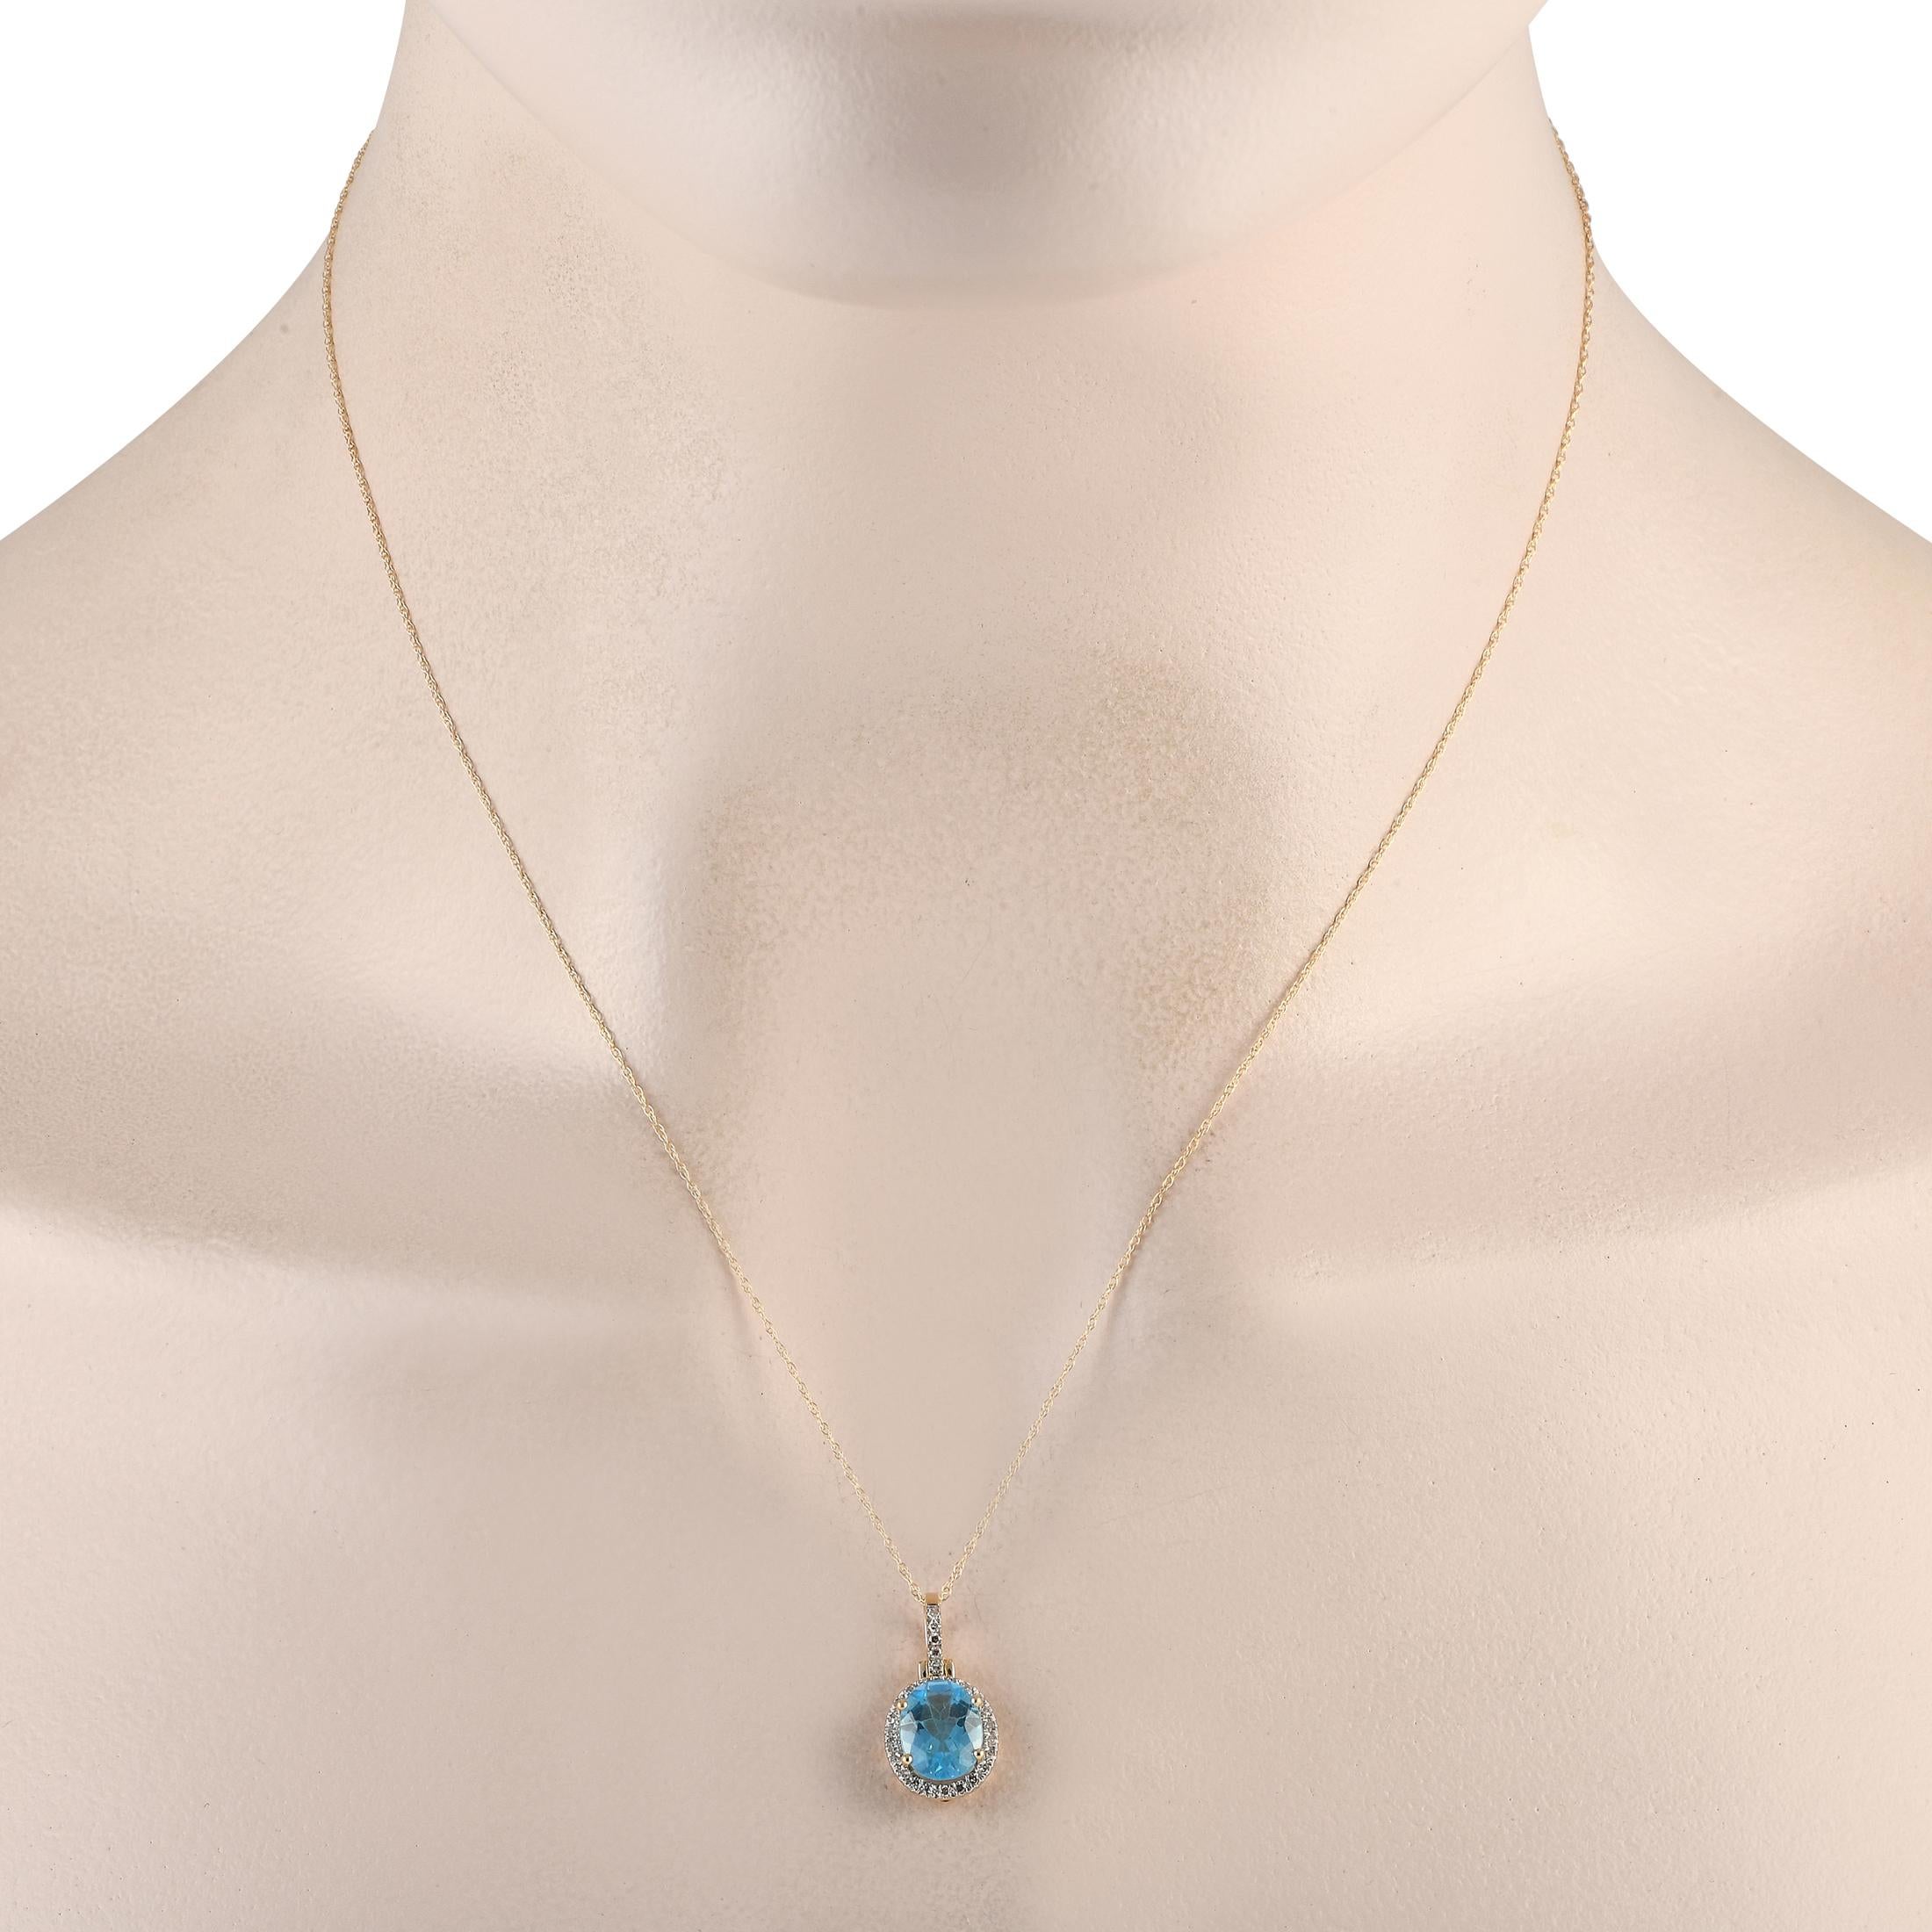 Perfect as a final touch to your cocktail or party outfit. This yellow gold necklace exudes an air of sophistication with its oval blue topaz pendant haloed by petite round diamonds. The bail is also traced with diamonds for non-stop shine. Holding